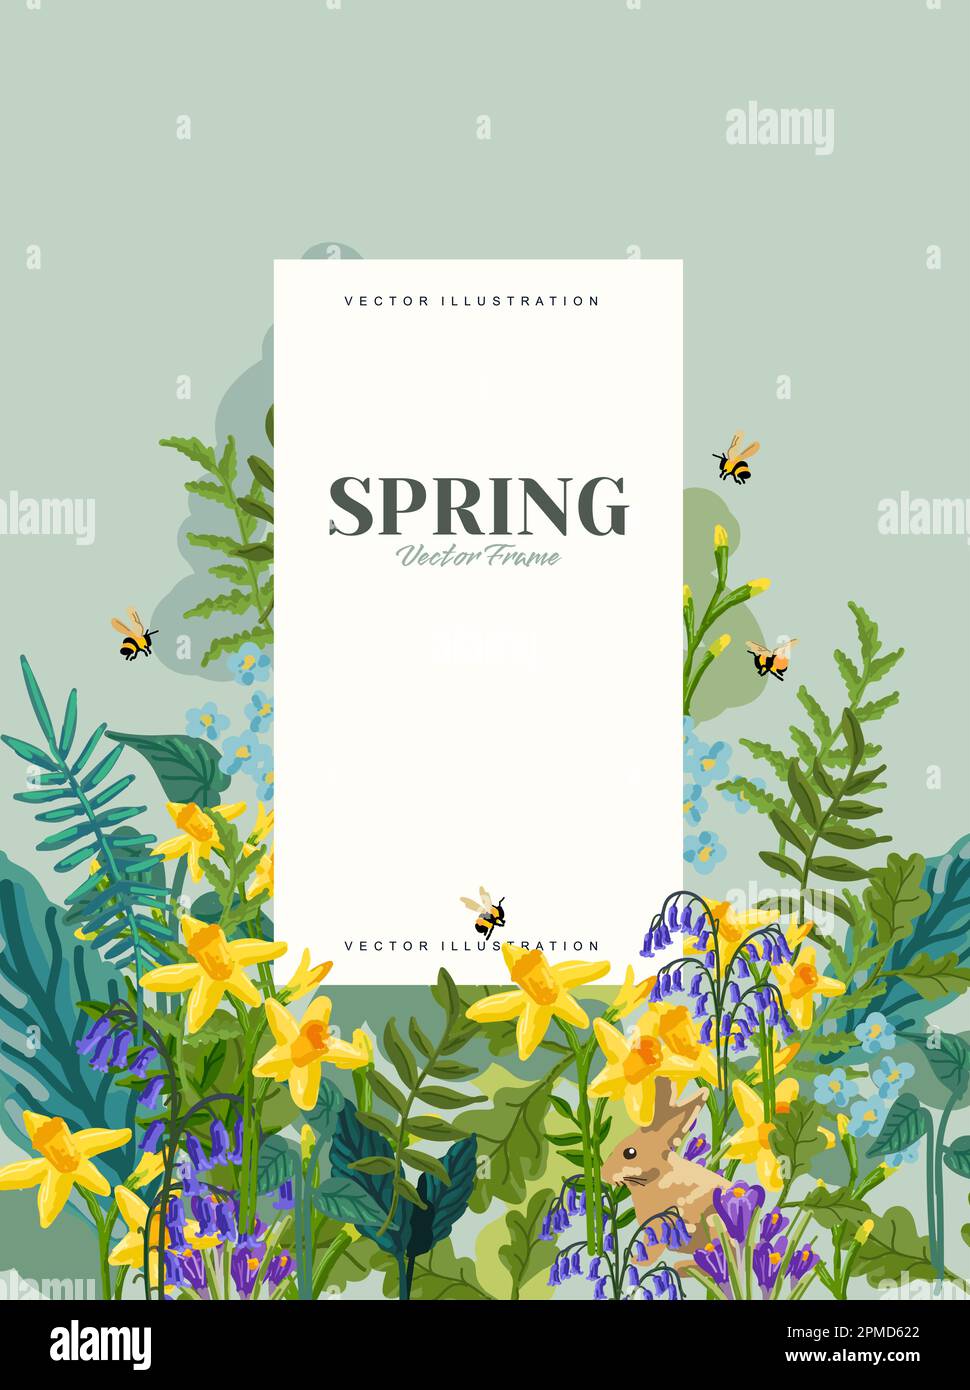 Floral Spring background layout with flowers, plants and bumblebees, vector illustration. Stock Vector